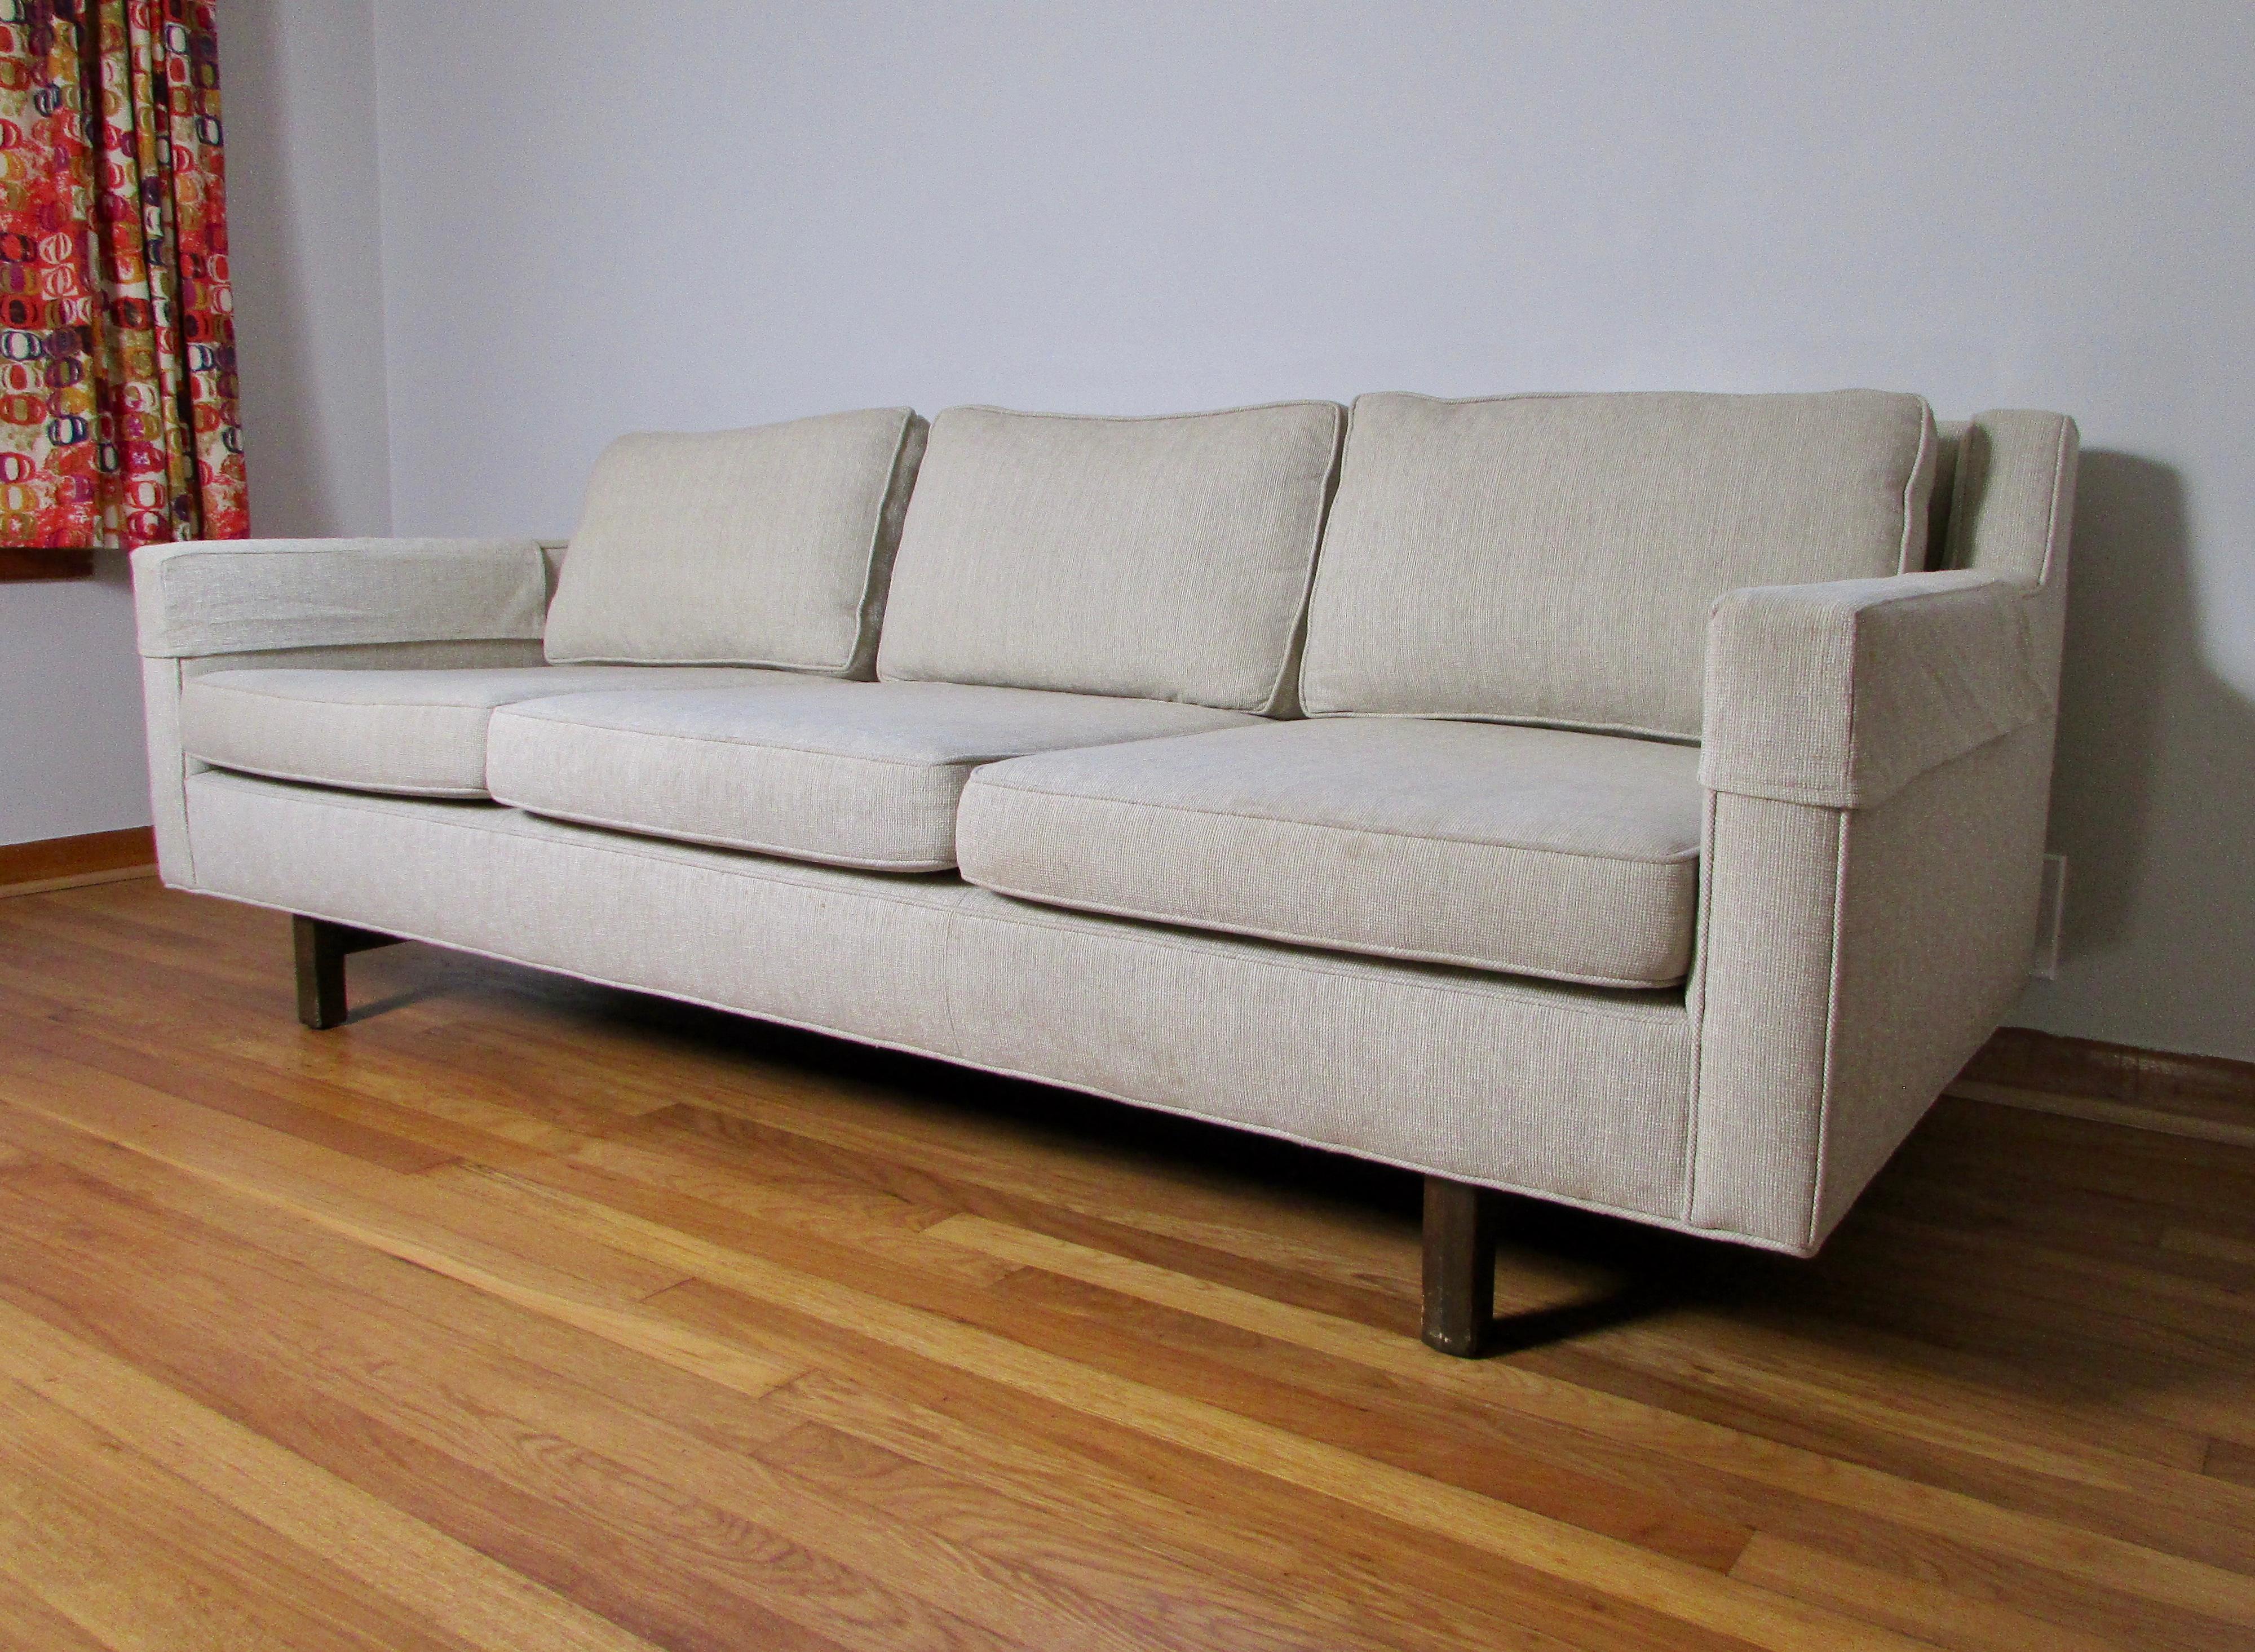 Dunbar Furniture Mid-Century Upholstered Three-Seat Sofa In Good Condition For Sale In Ferndale, MI